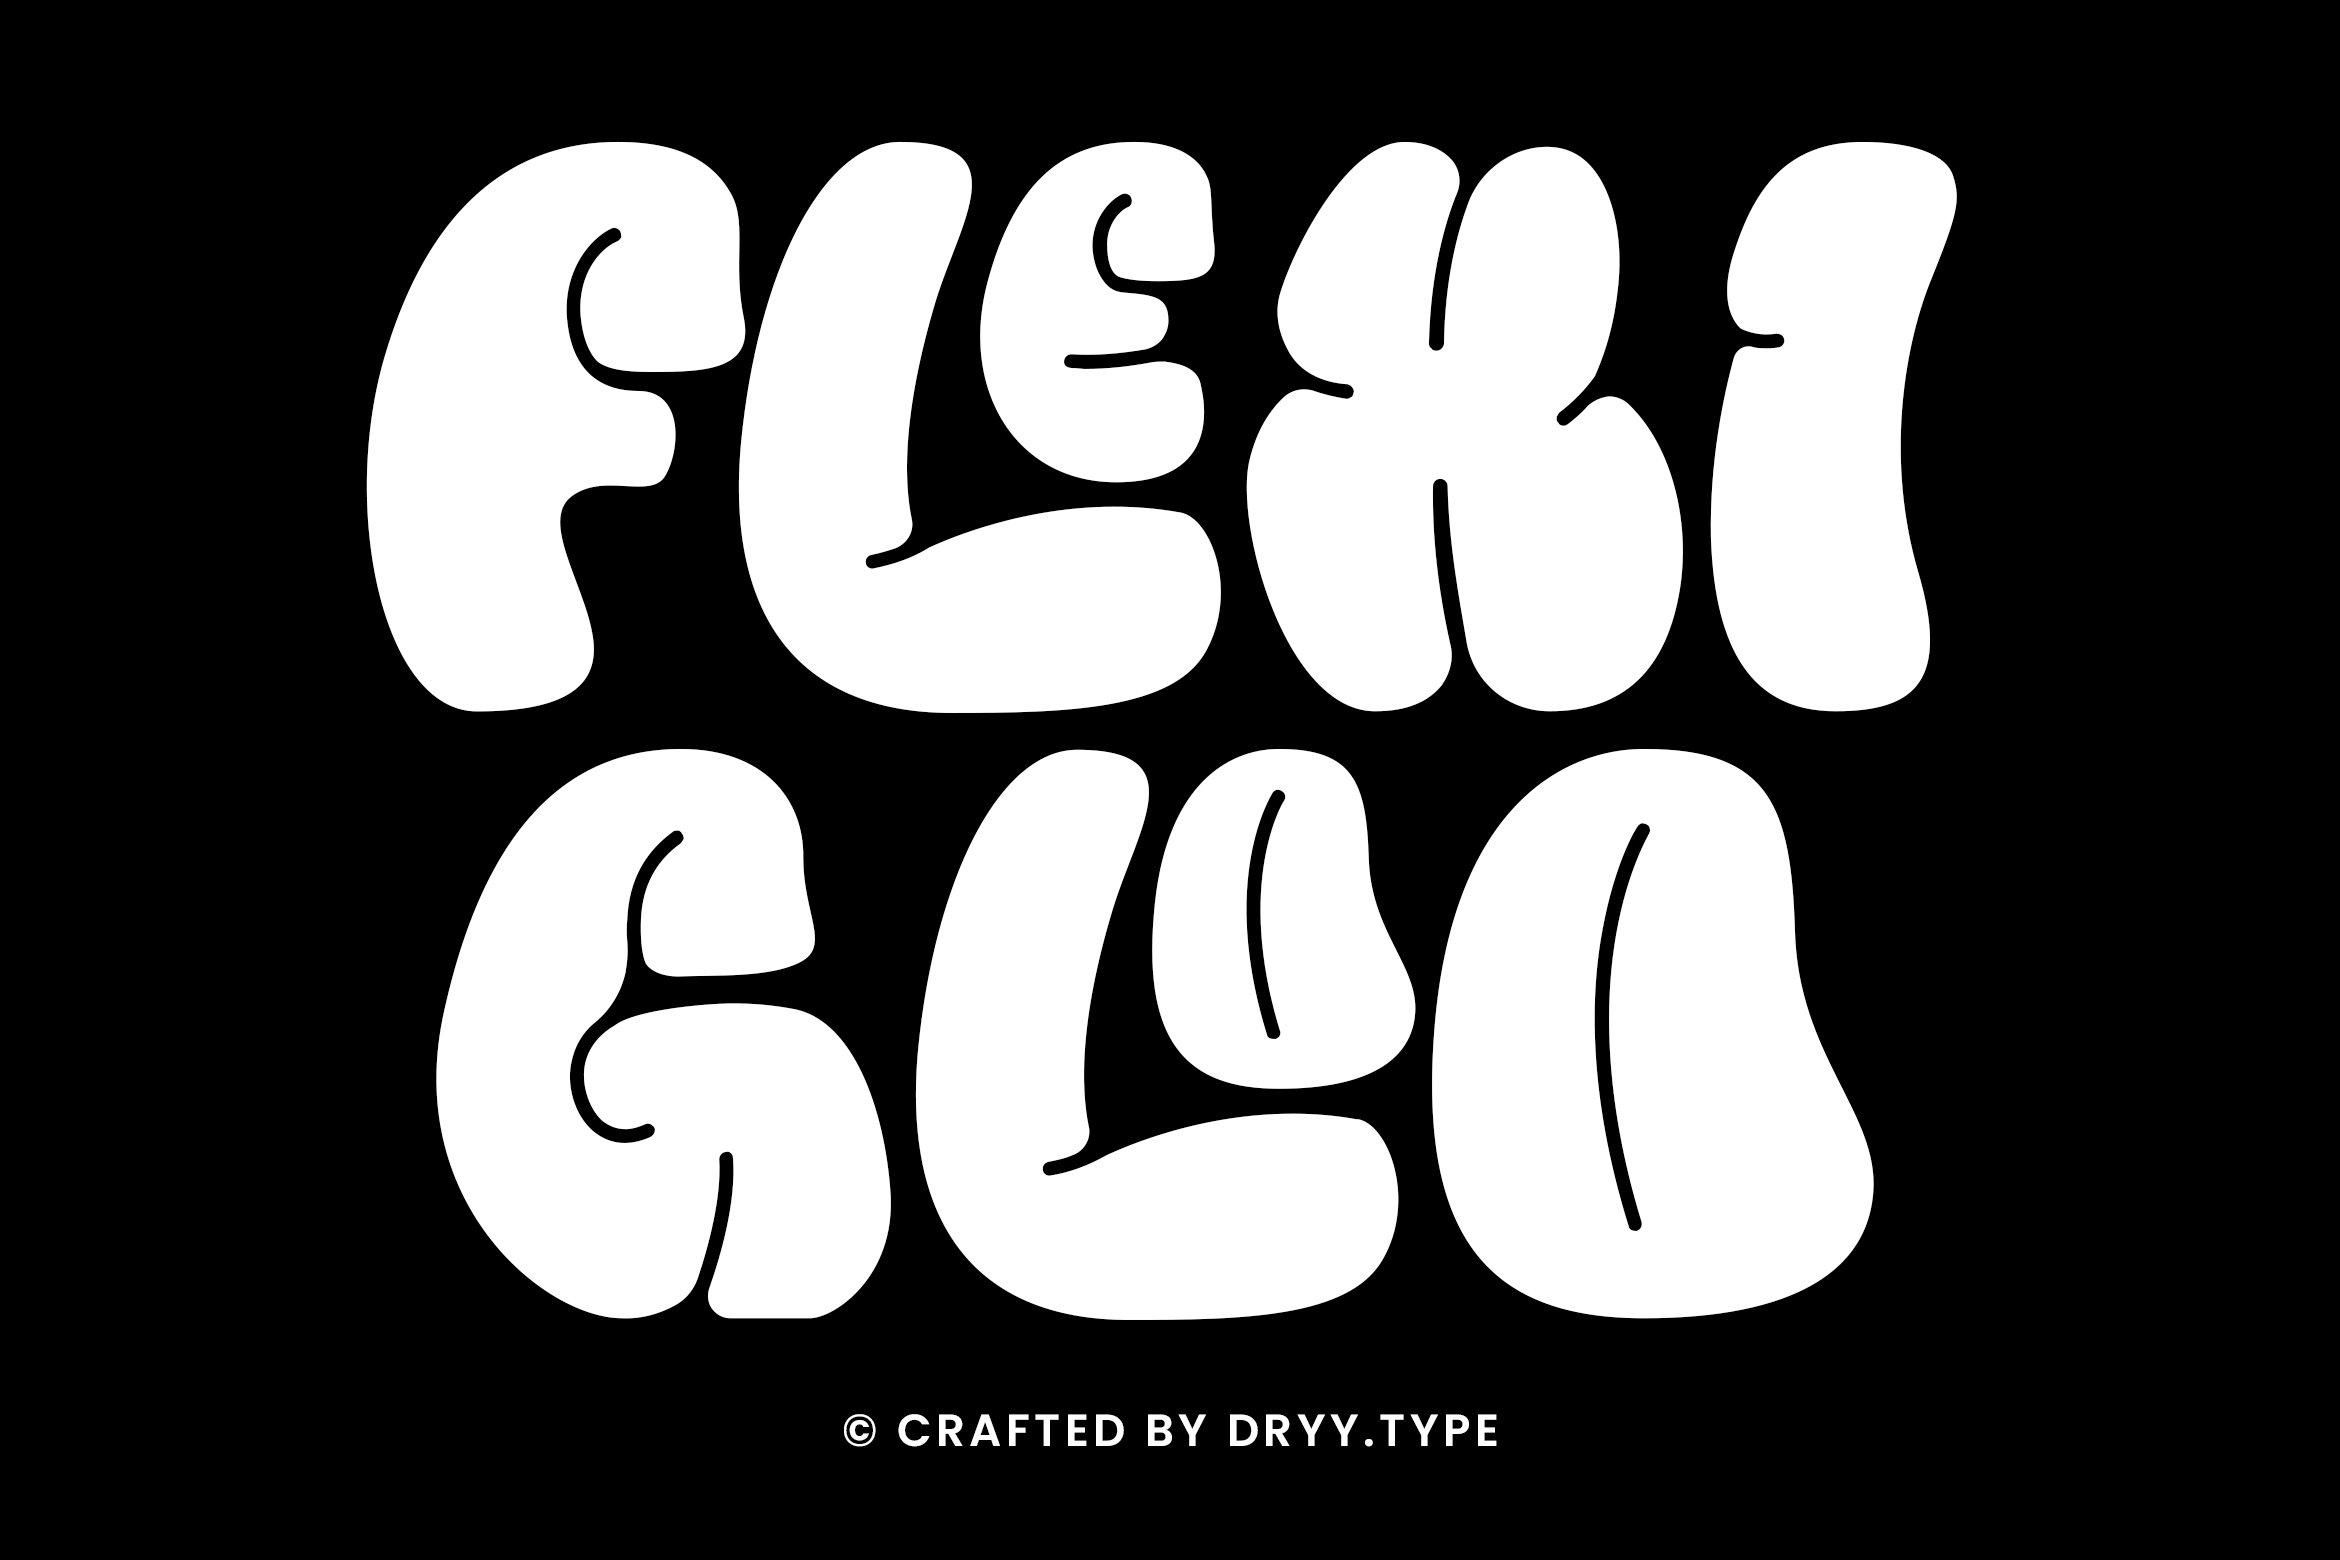 Close-up of the Flexi Gloo font, a versatile display typeface that can be used for a variety of designs, from logos and branding to packaging and apparel.